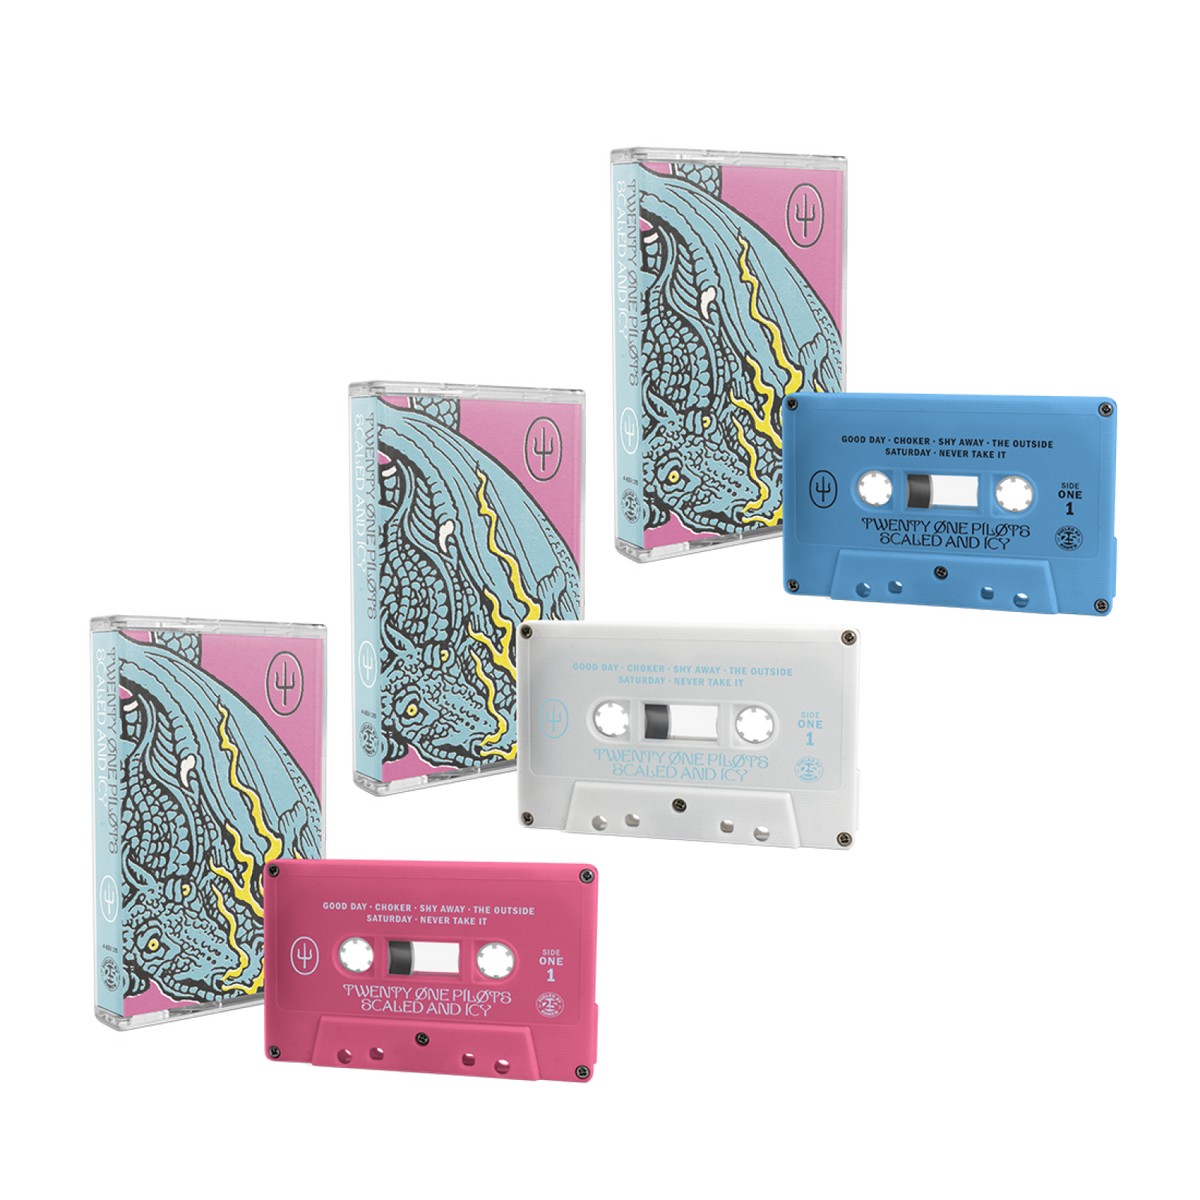 Twenty One Pilots - Exclusive Scaled And Icy Colored 3 Cassette Bundle ...